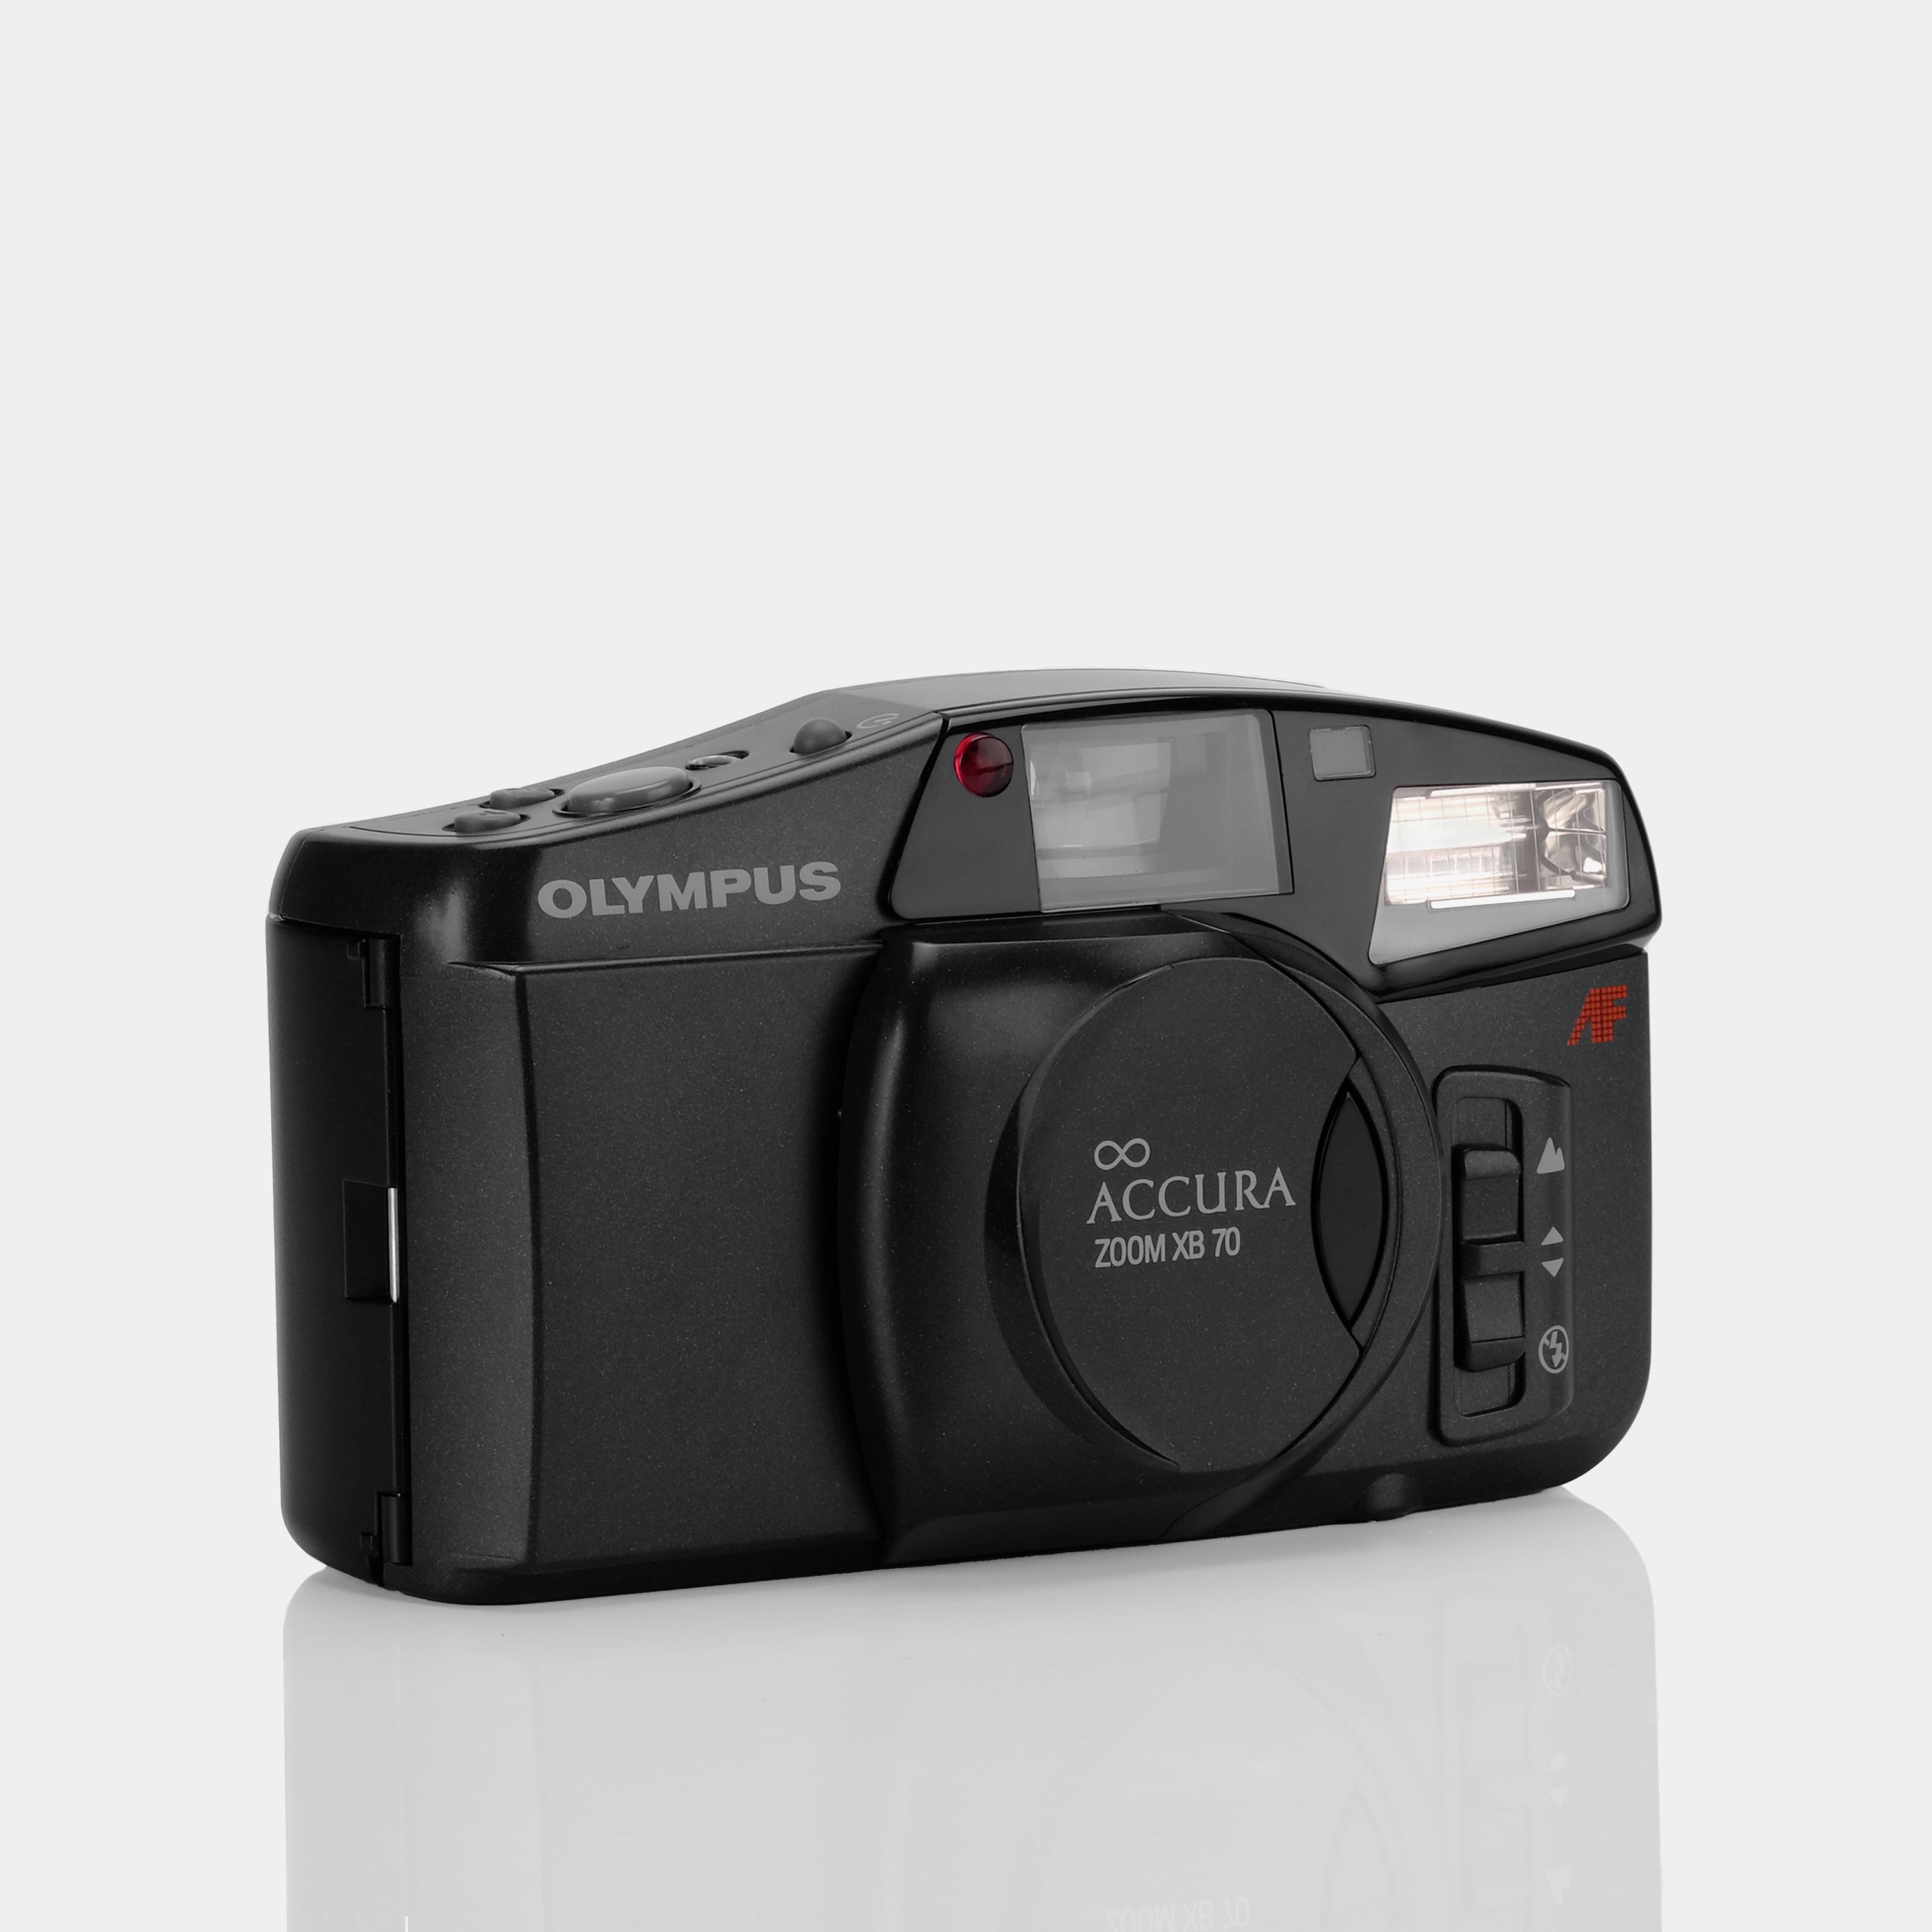 Olympus ∞ Accura Zoom XB 70 35mm Point and Shoot Film Camera